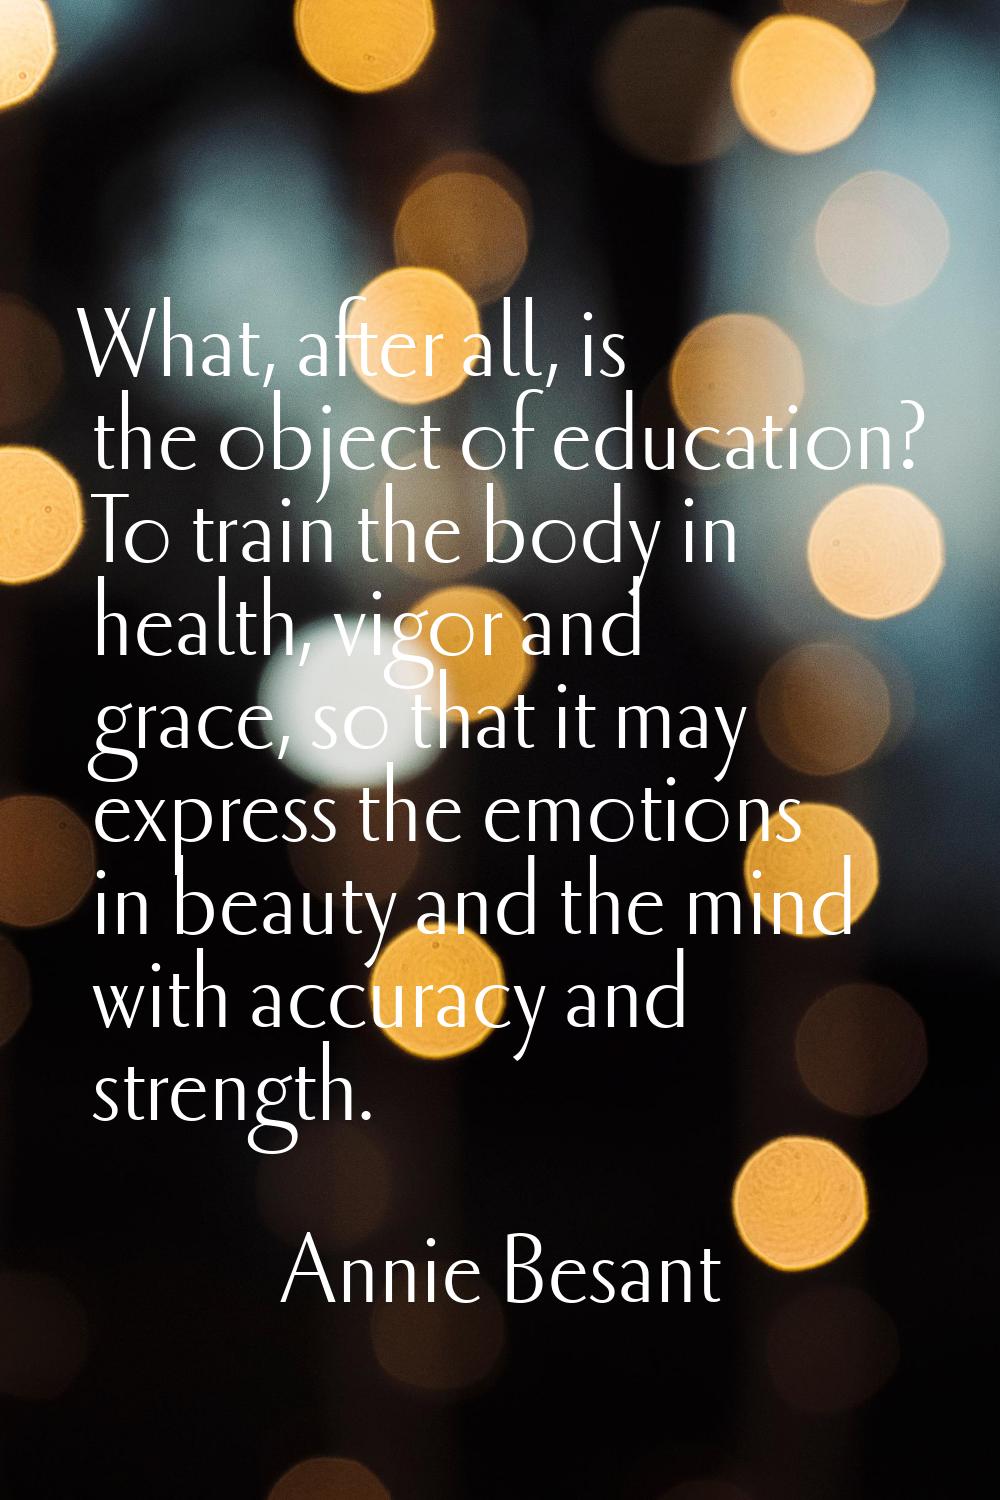 What, after all, is the object of education? To train the body in health, vigor and grace, so that 